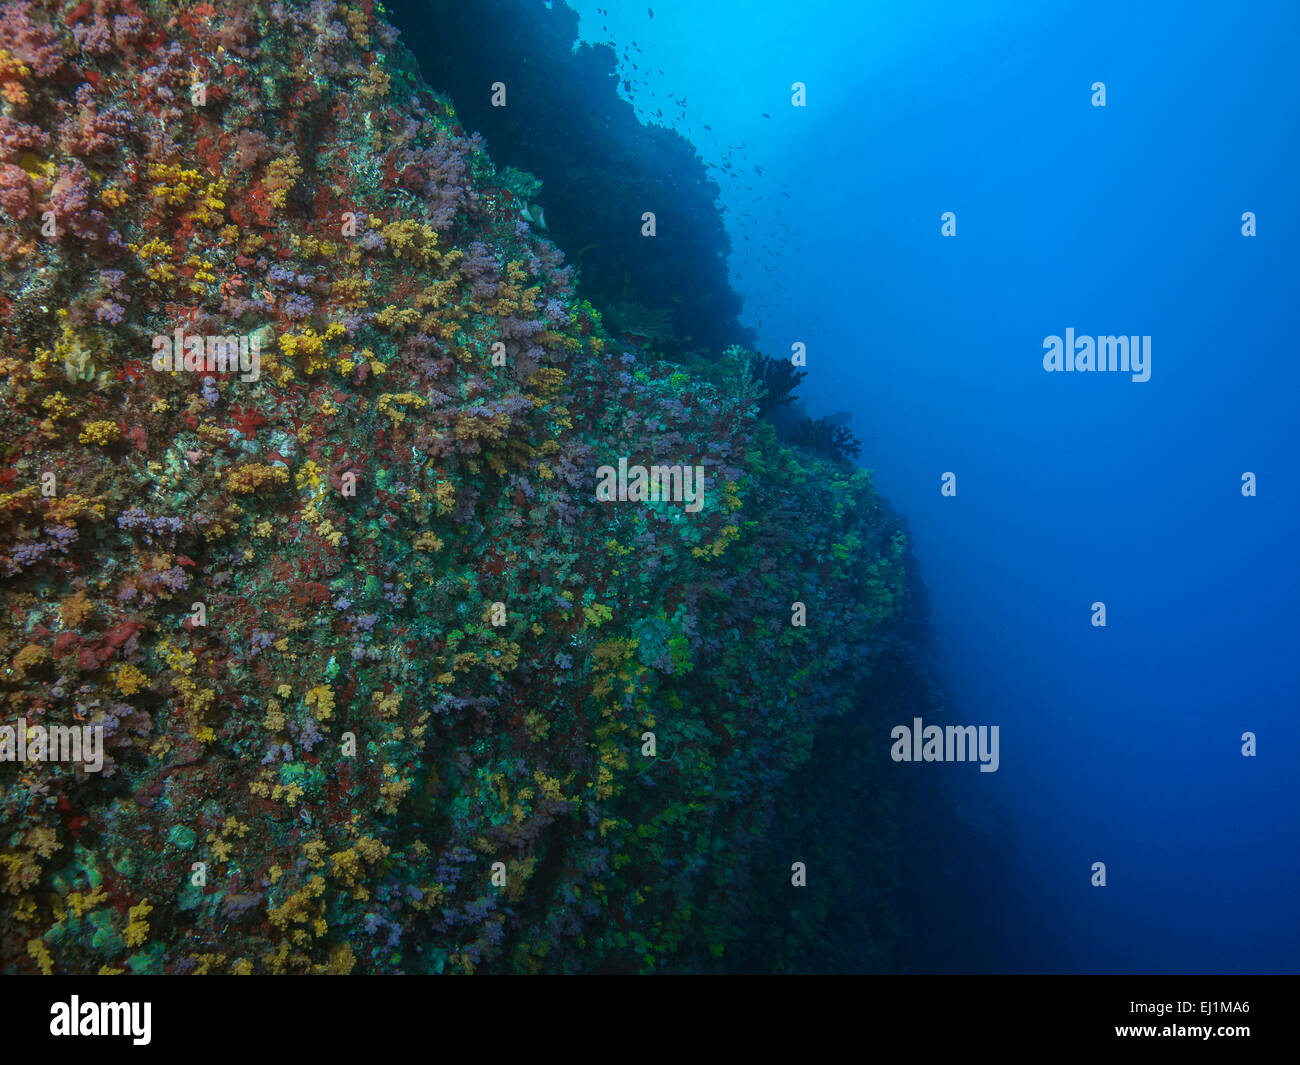 Undersea wall of Meemu atoll in the Maldives, coral returning after 1998 El Nino warming of ocean temperature. Stock Photo